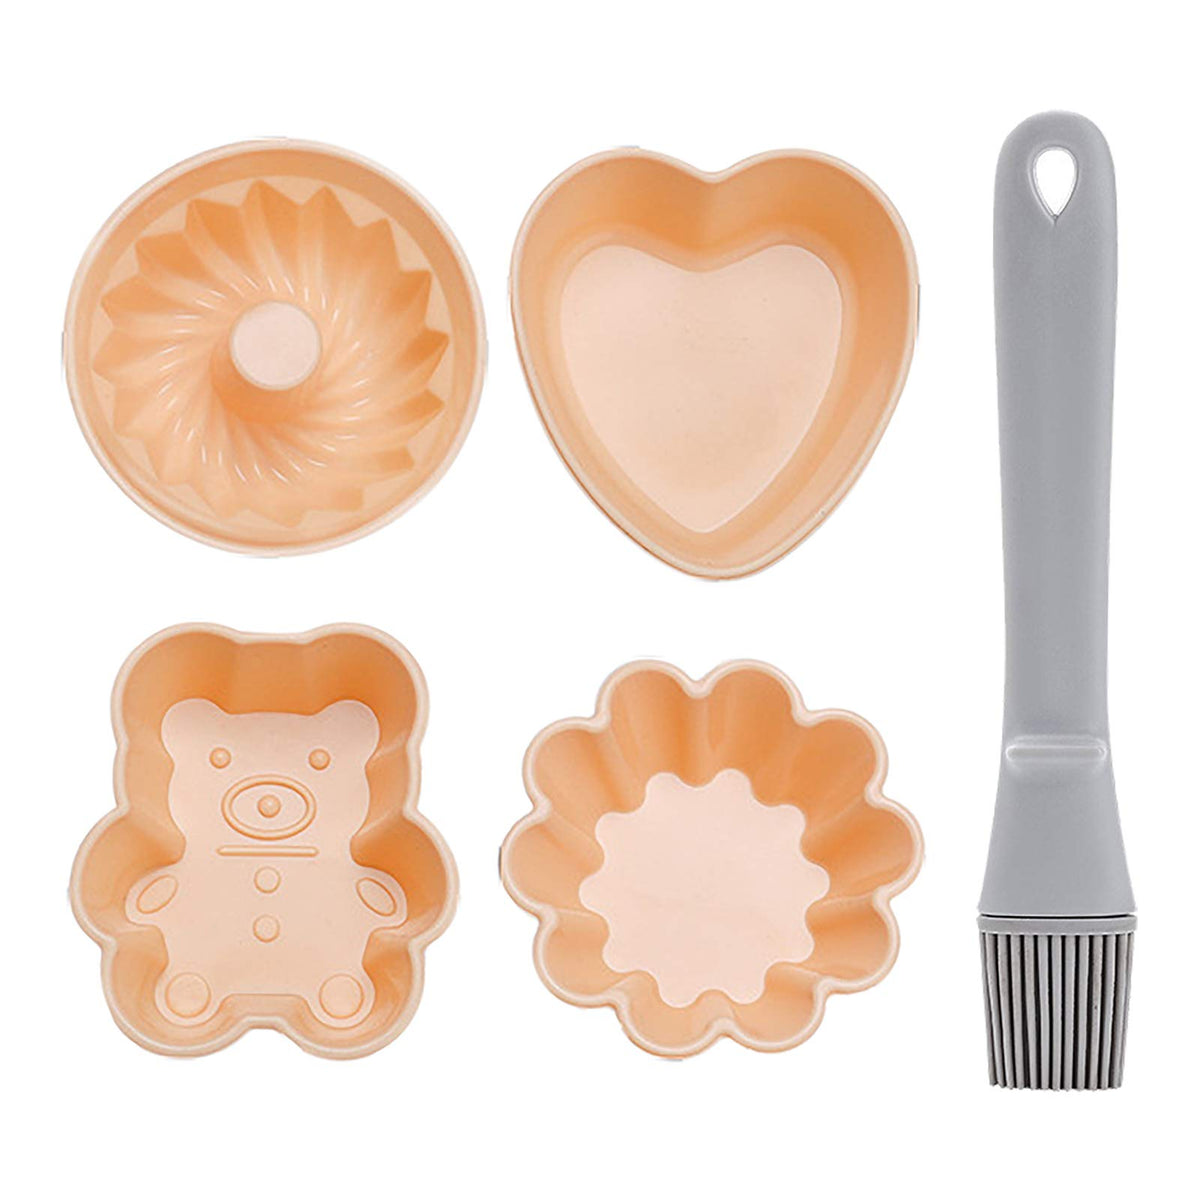 A-XINTONG 4 Pack Mini Fluted Round Silicone Baking Mold Spiral Pattern  Bundt Pan Non-stick Chiffon Savarin Cake Mold Mousse Brownie Dessert Cake